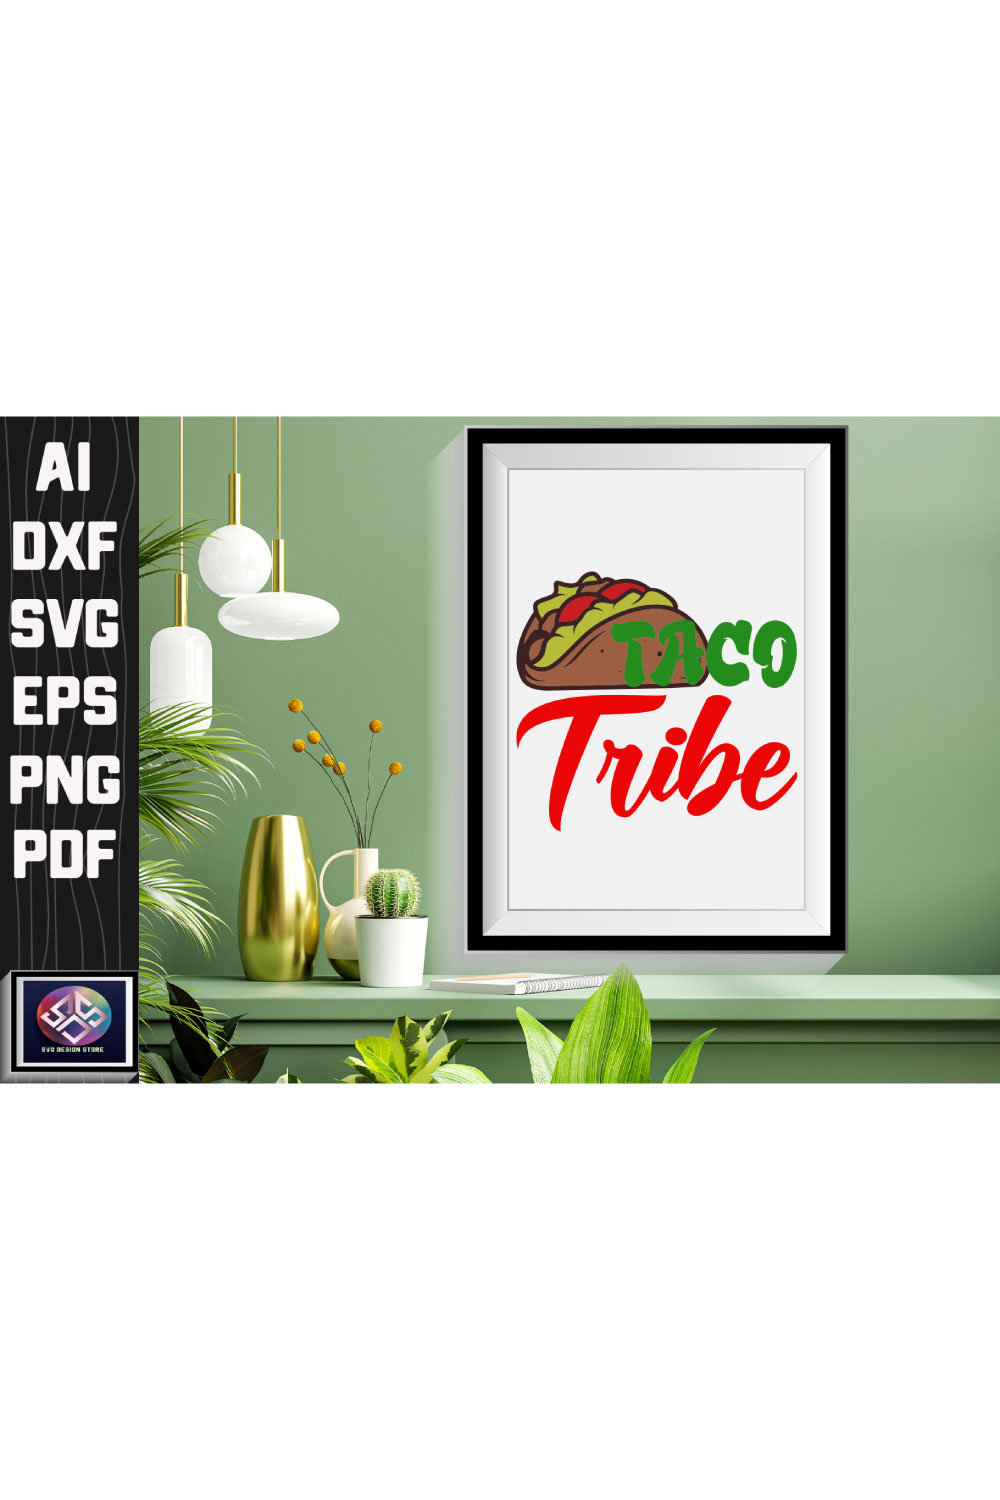 Taco Tribe pinterest preview image.